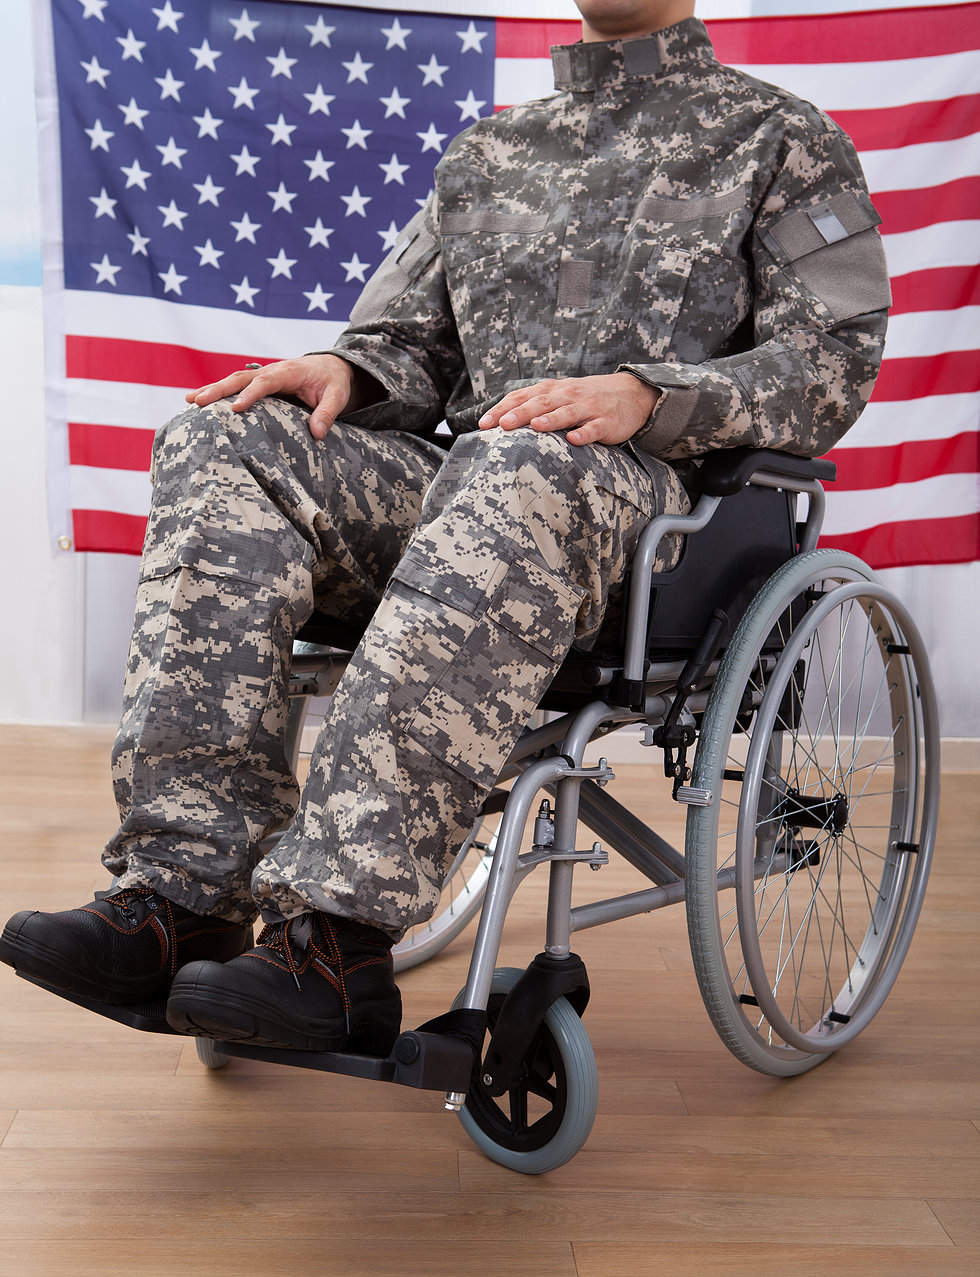 Patriotic Soldier Sitting On Wheel Chair Against American Flag Financial Assistance for Veterans in Texas